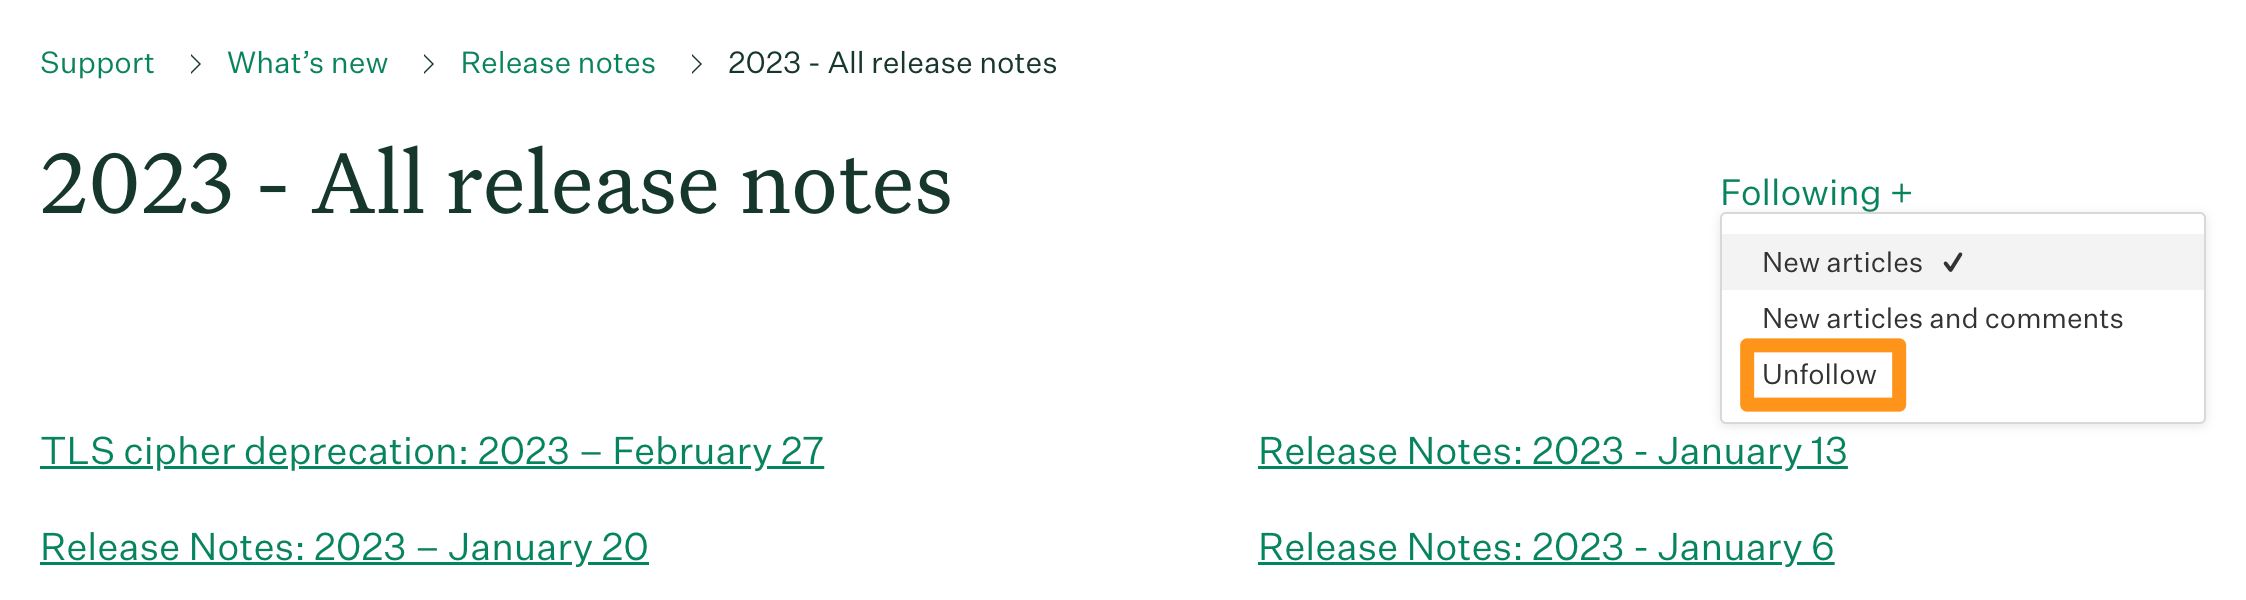 Screenshot_of_2023_all_release_notes.png